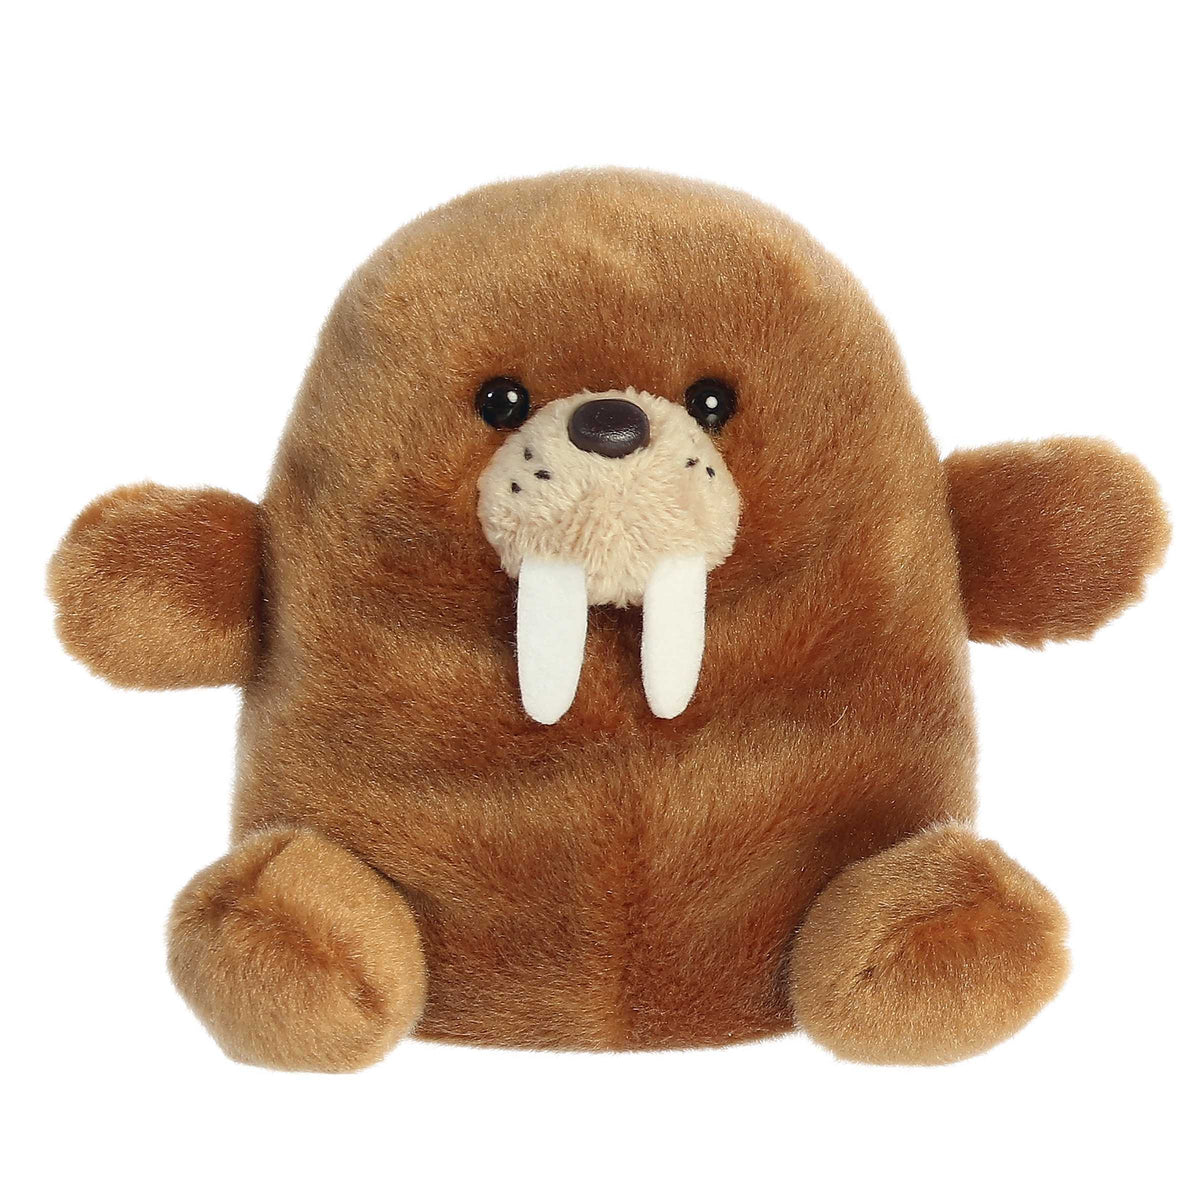 Waldo is a huggable plush with rich, cinnamon-brown fur, long, ivory tusks, and soulful eyes that tend to drift off.